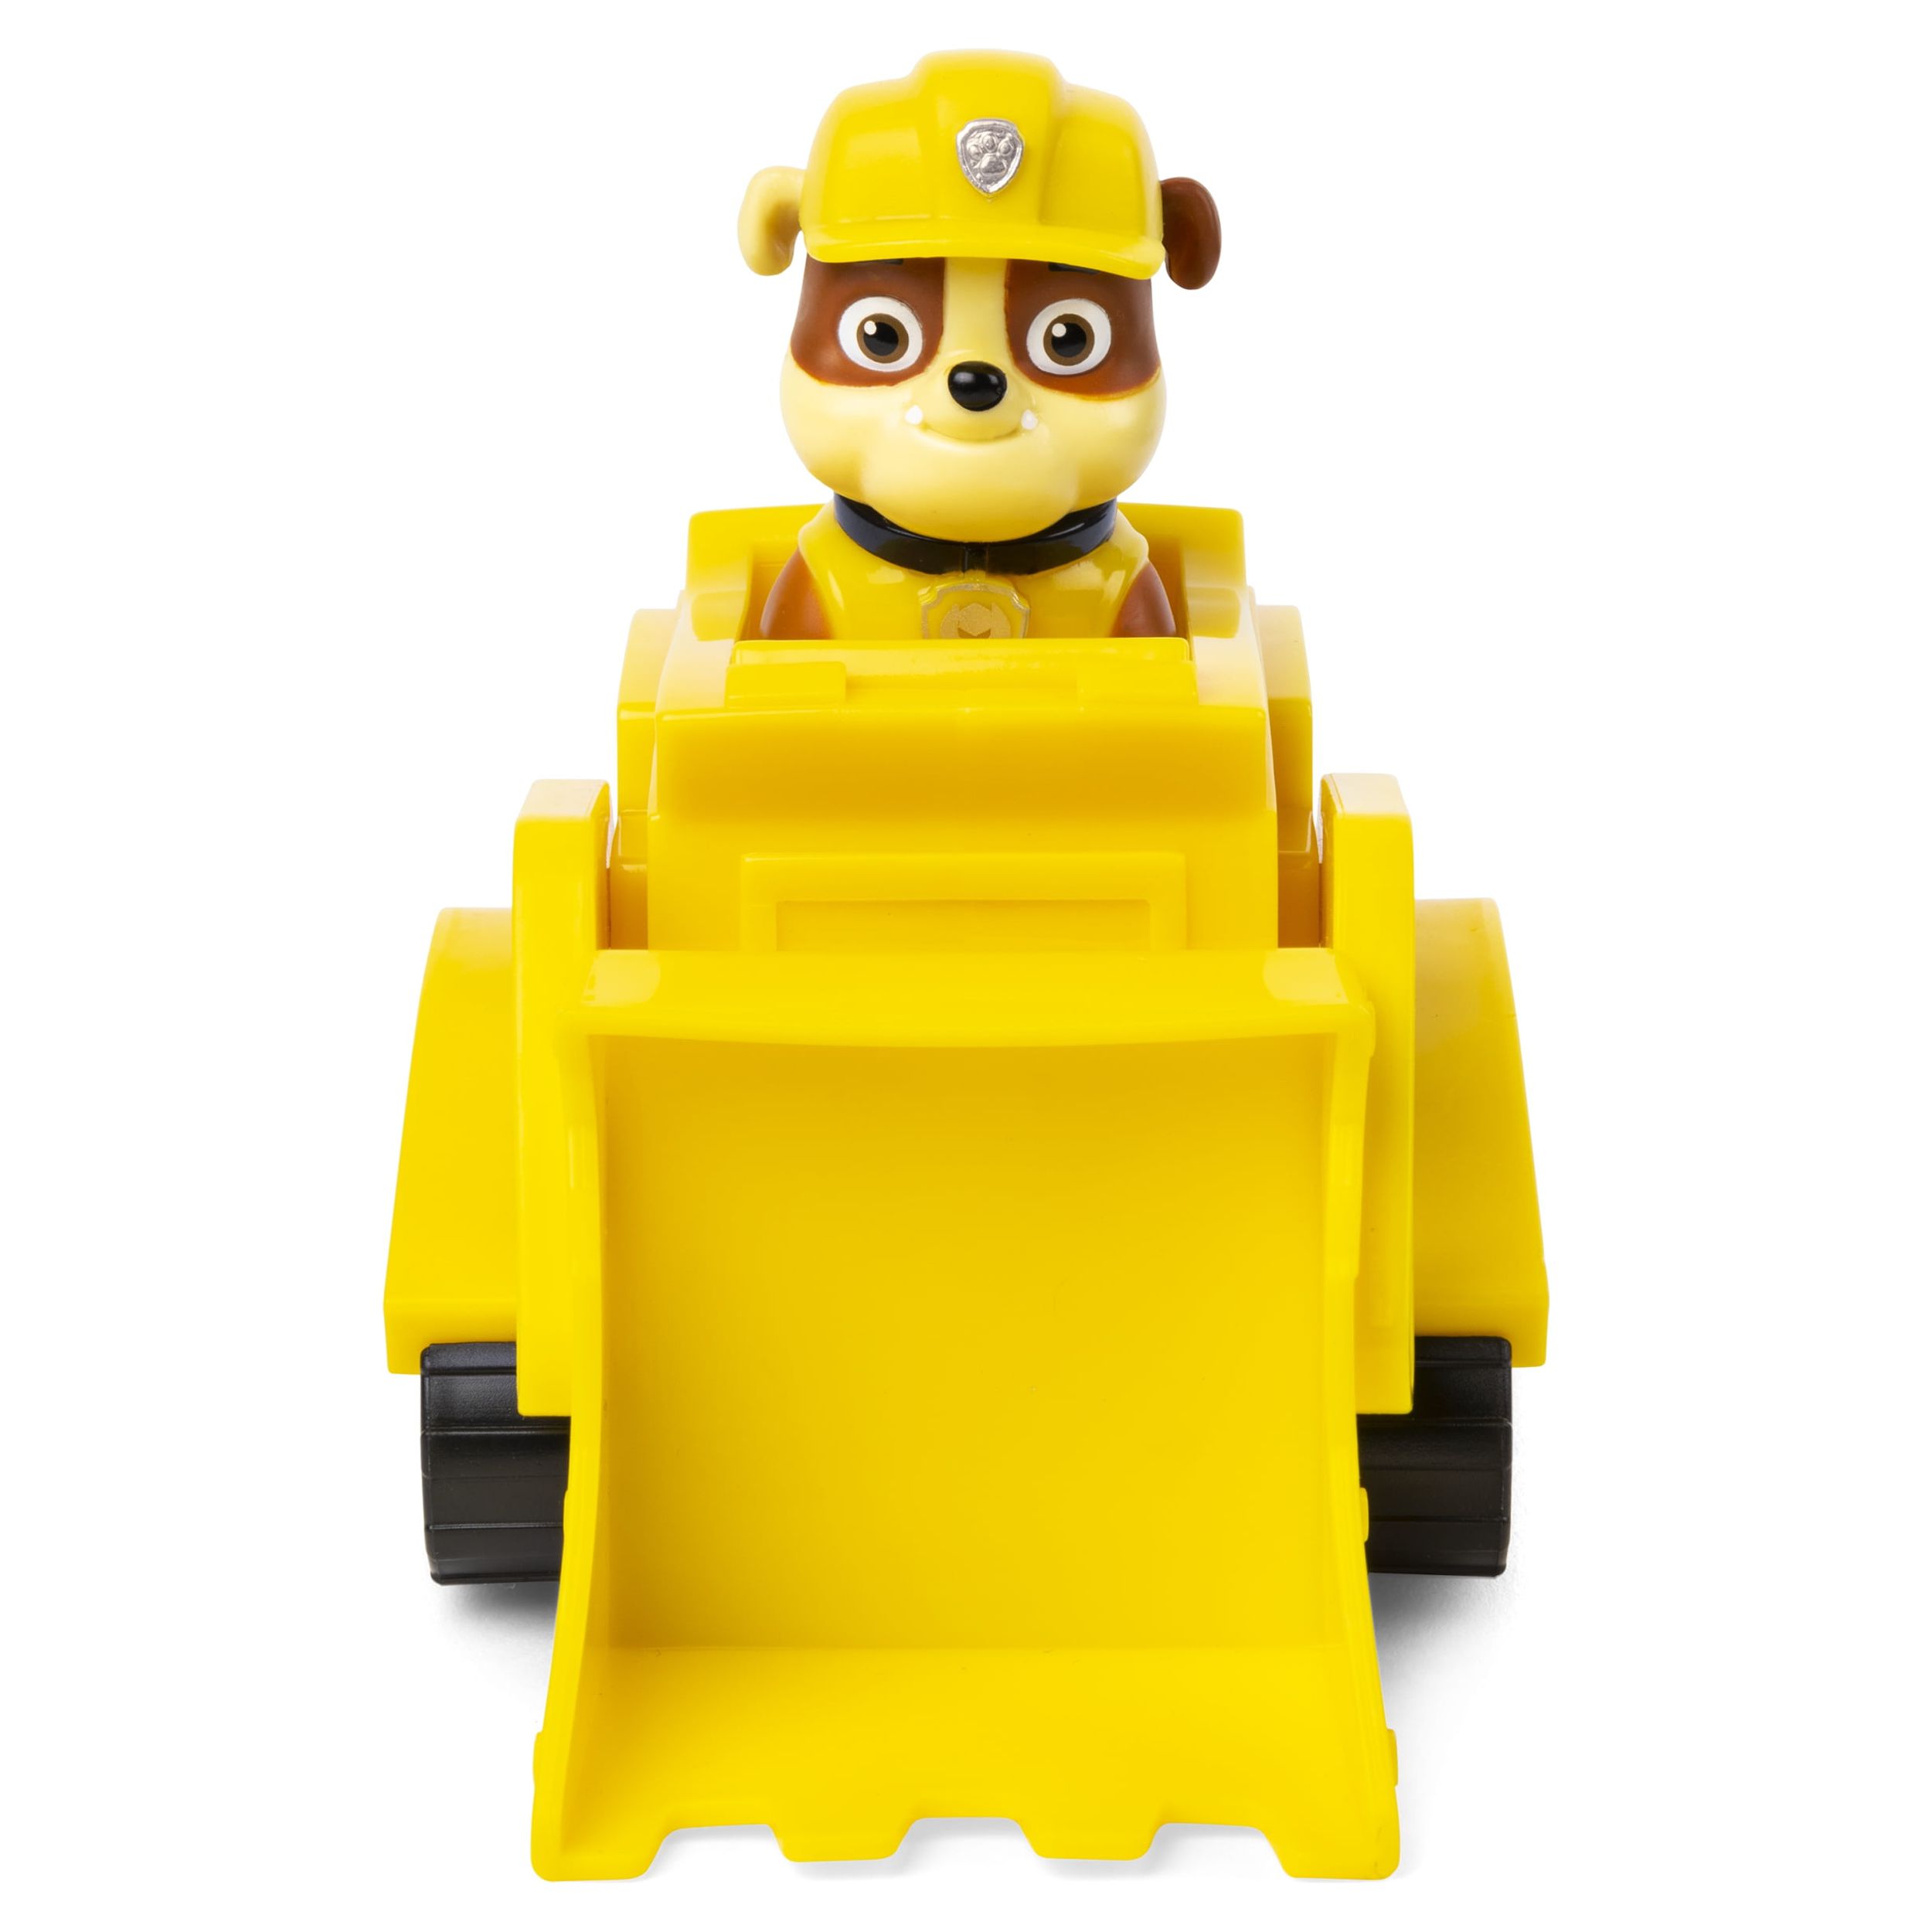 PAW Patrol, Rubble’s Bulldozer Vehicle with Collectible Figure, for Kids Aged 3 and Up - image 2 of 6